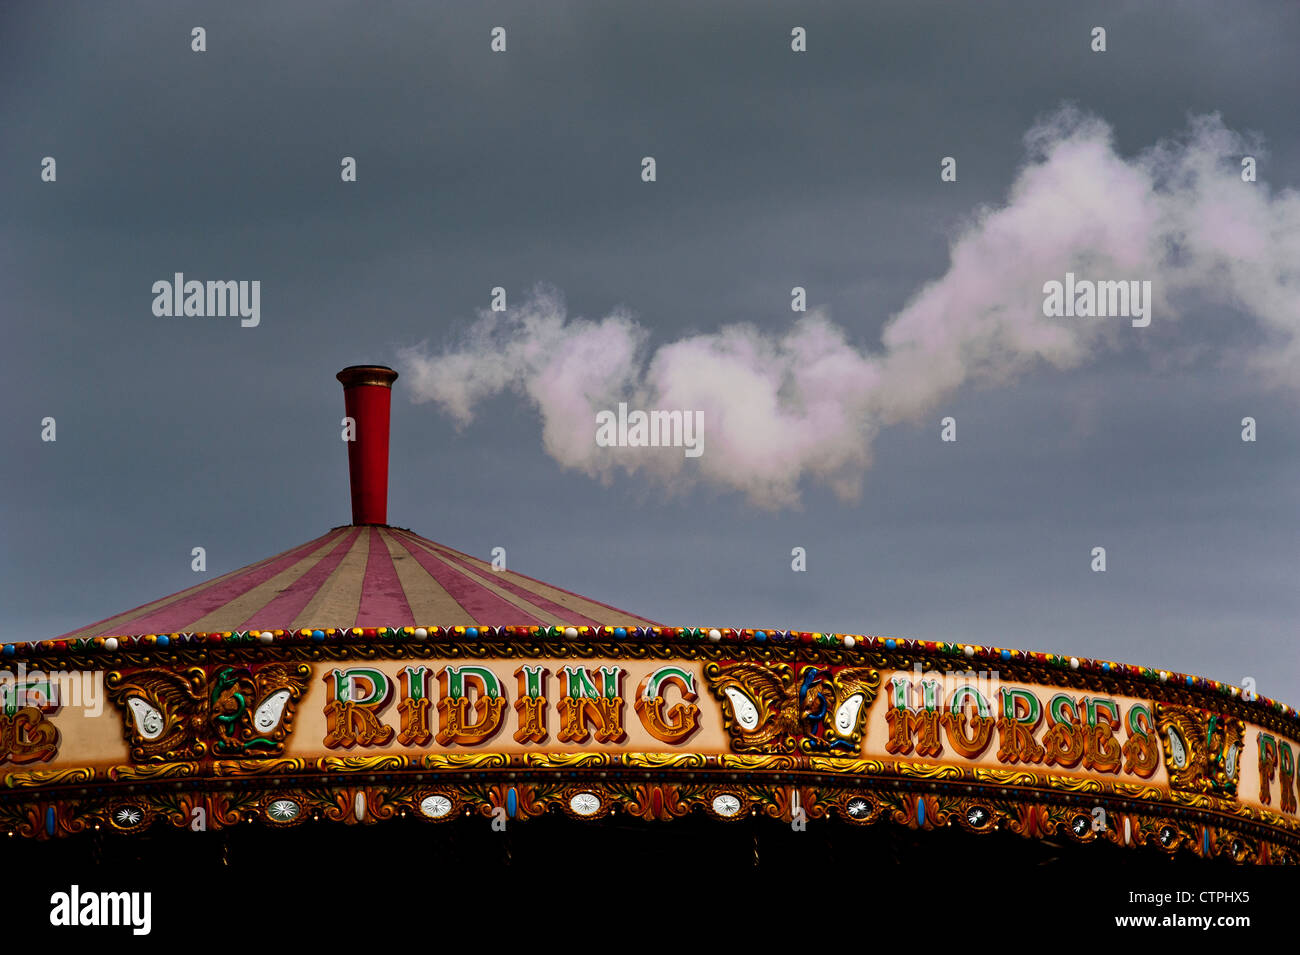 Steam or smoke escaping from the chimney on an old-fashioned steam-powered fairground merry-go-round. Stock Photo